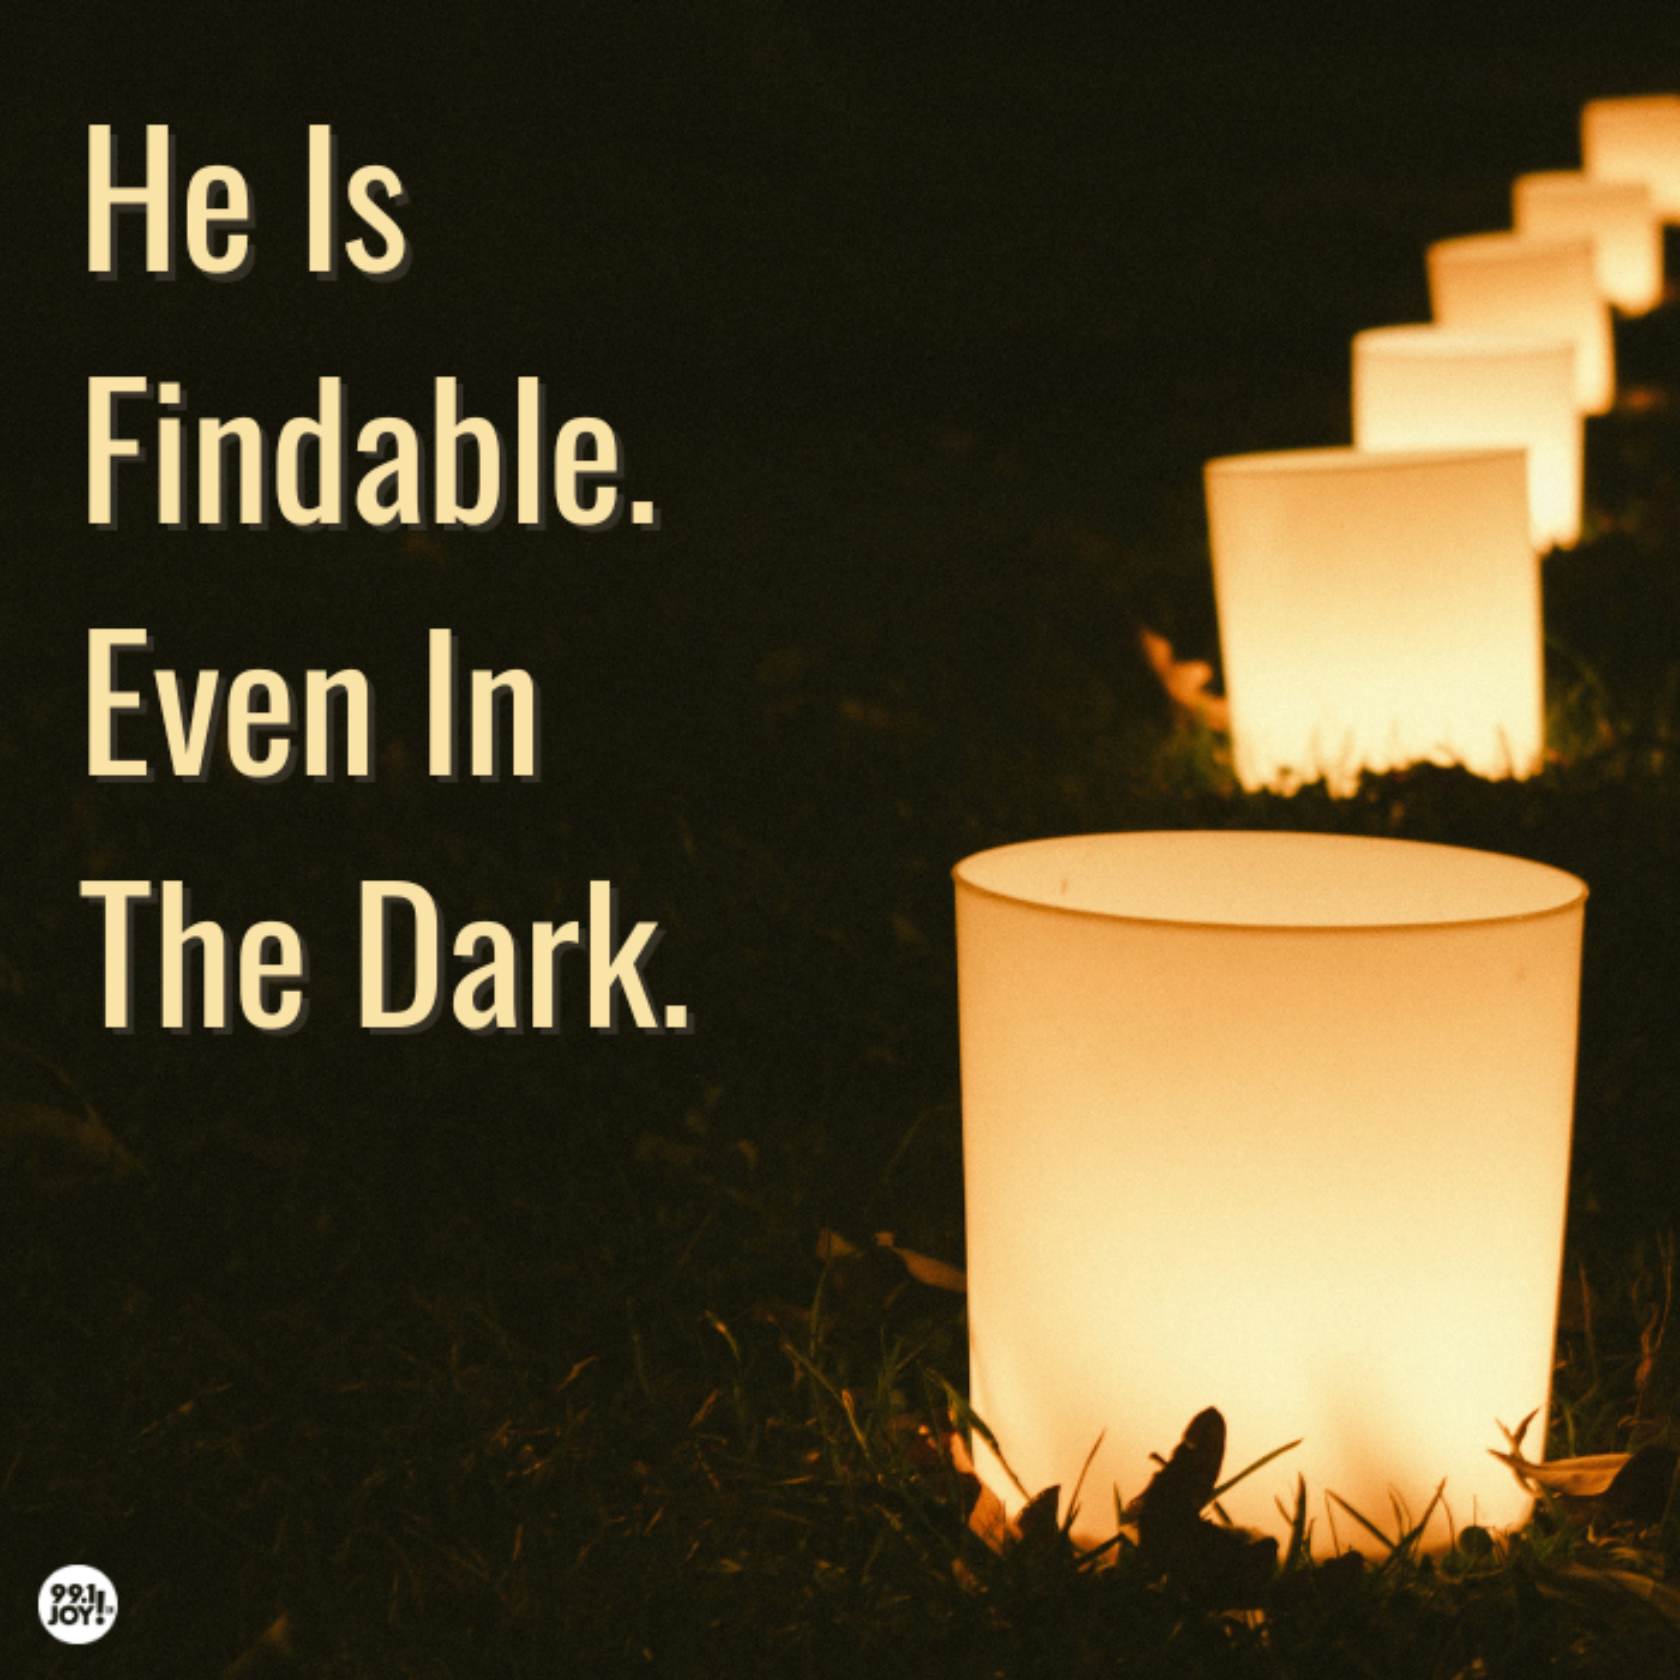 He Is Findable. Even In The Dark